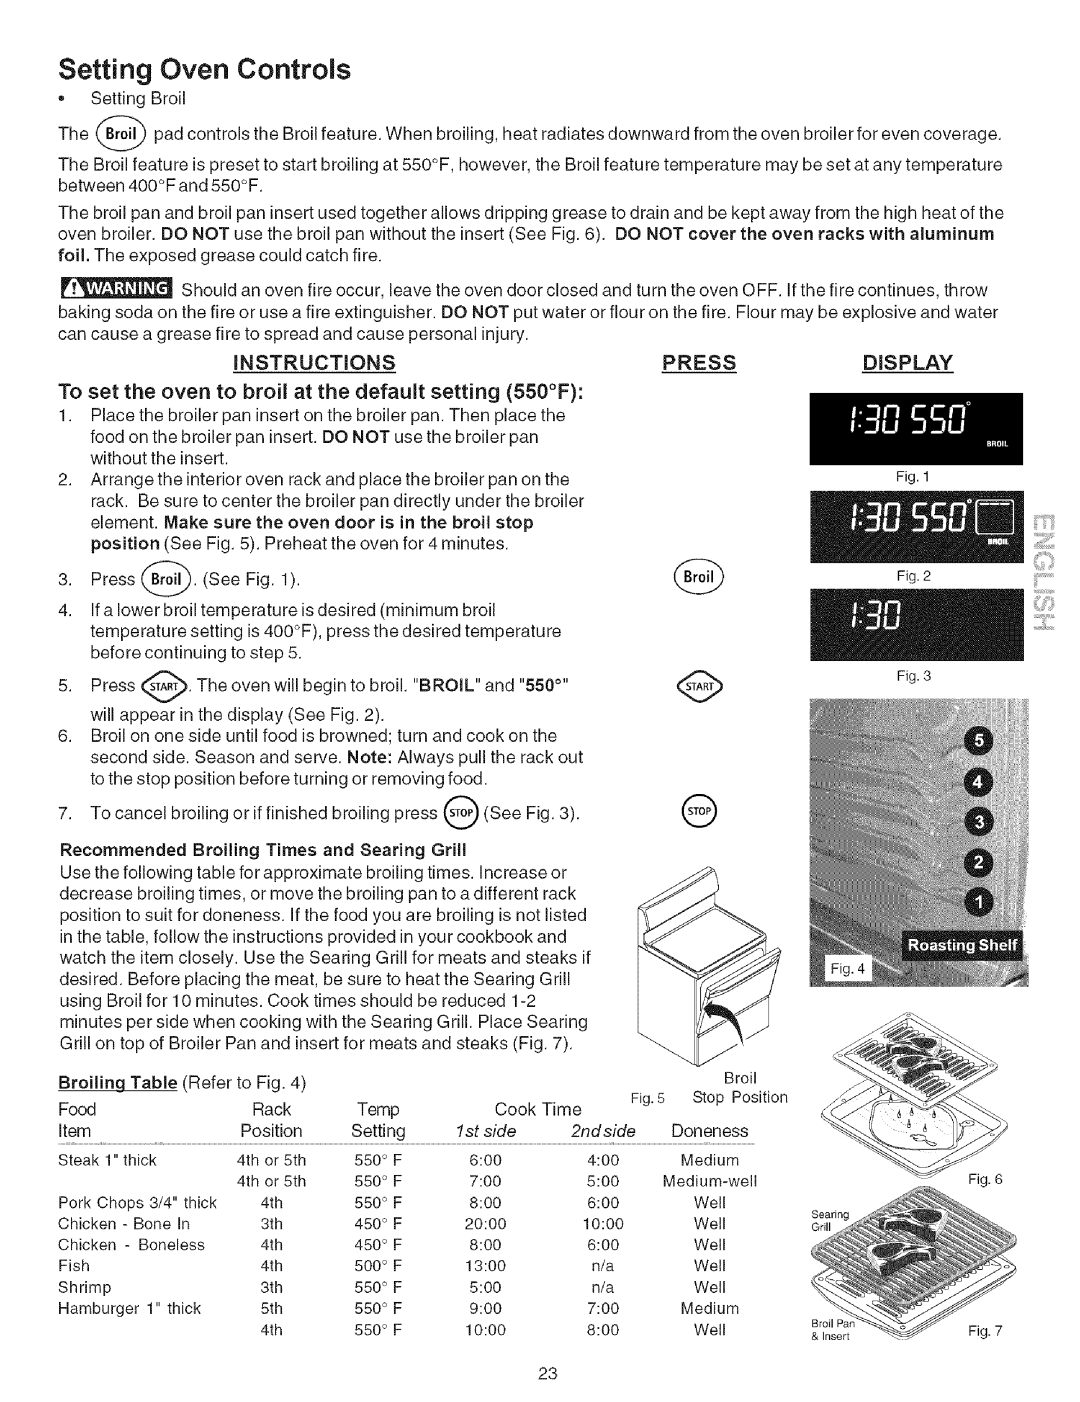 Kenmore 790.7946 manual Setting Oven Controls, Instructions, Press, Display, Make sure the oven 